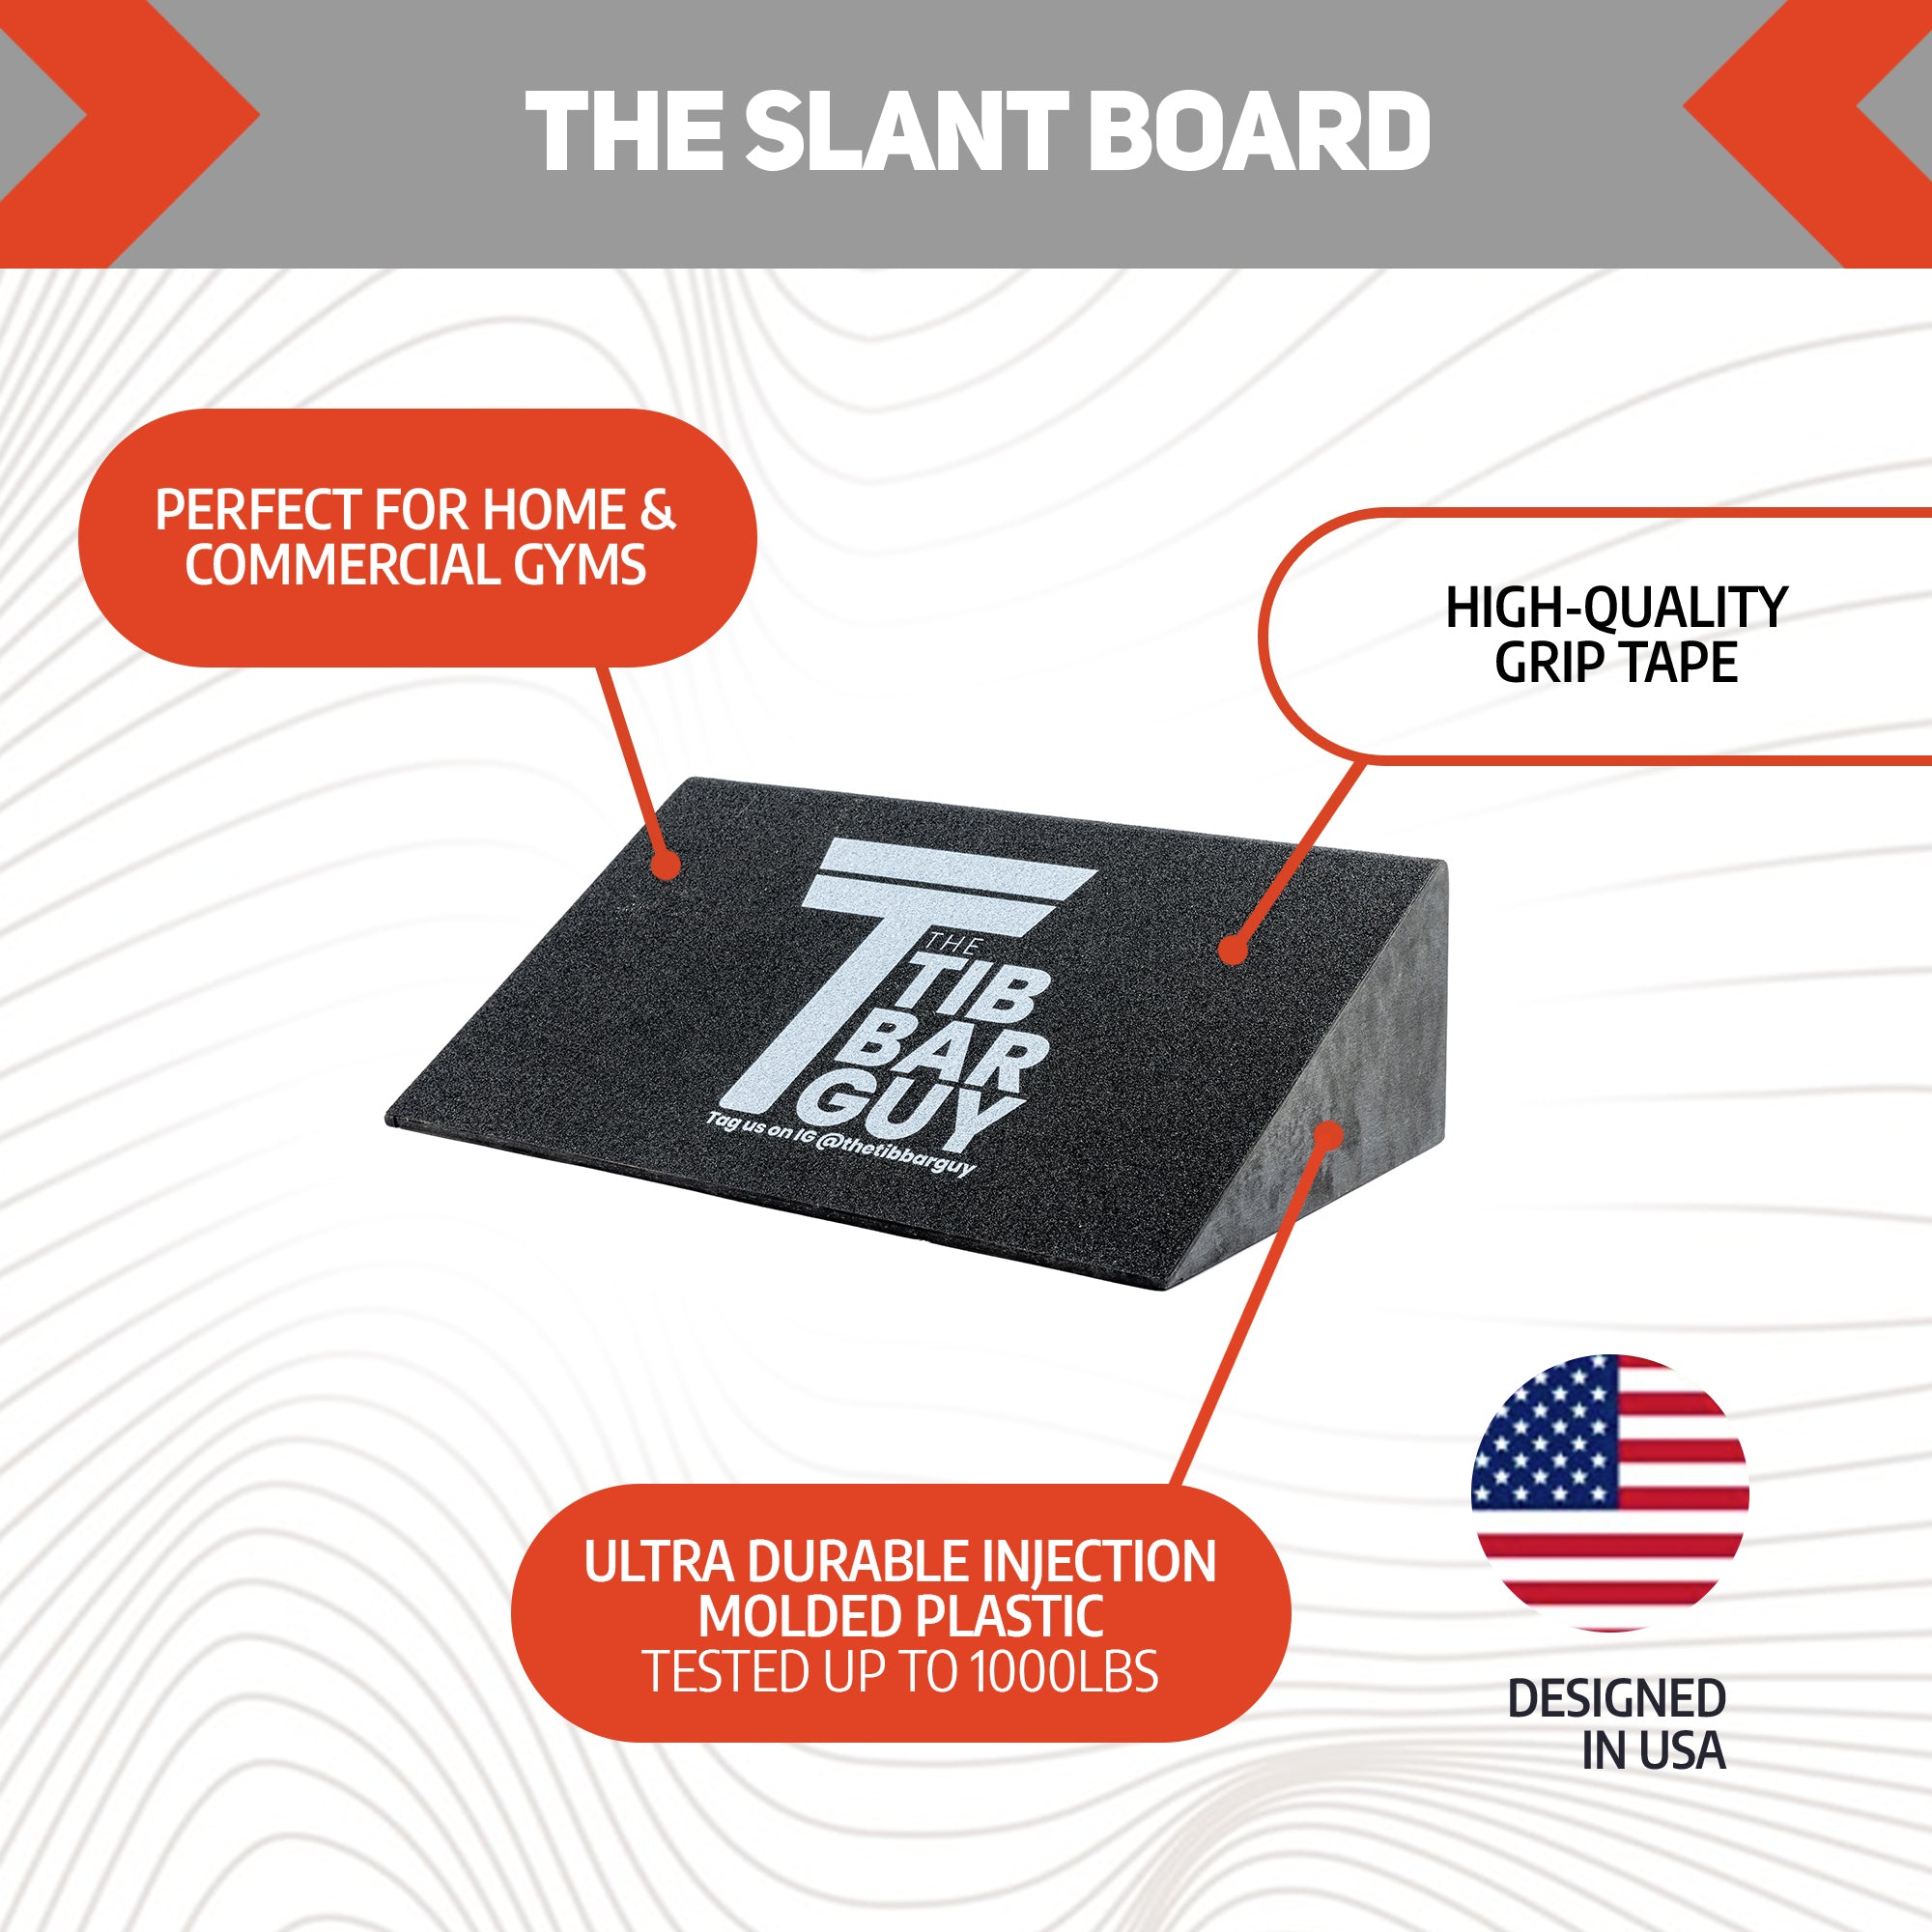 Fitness Equipment | The Slant Board Created By The Tib Bar Guy